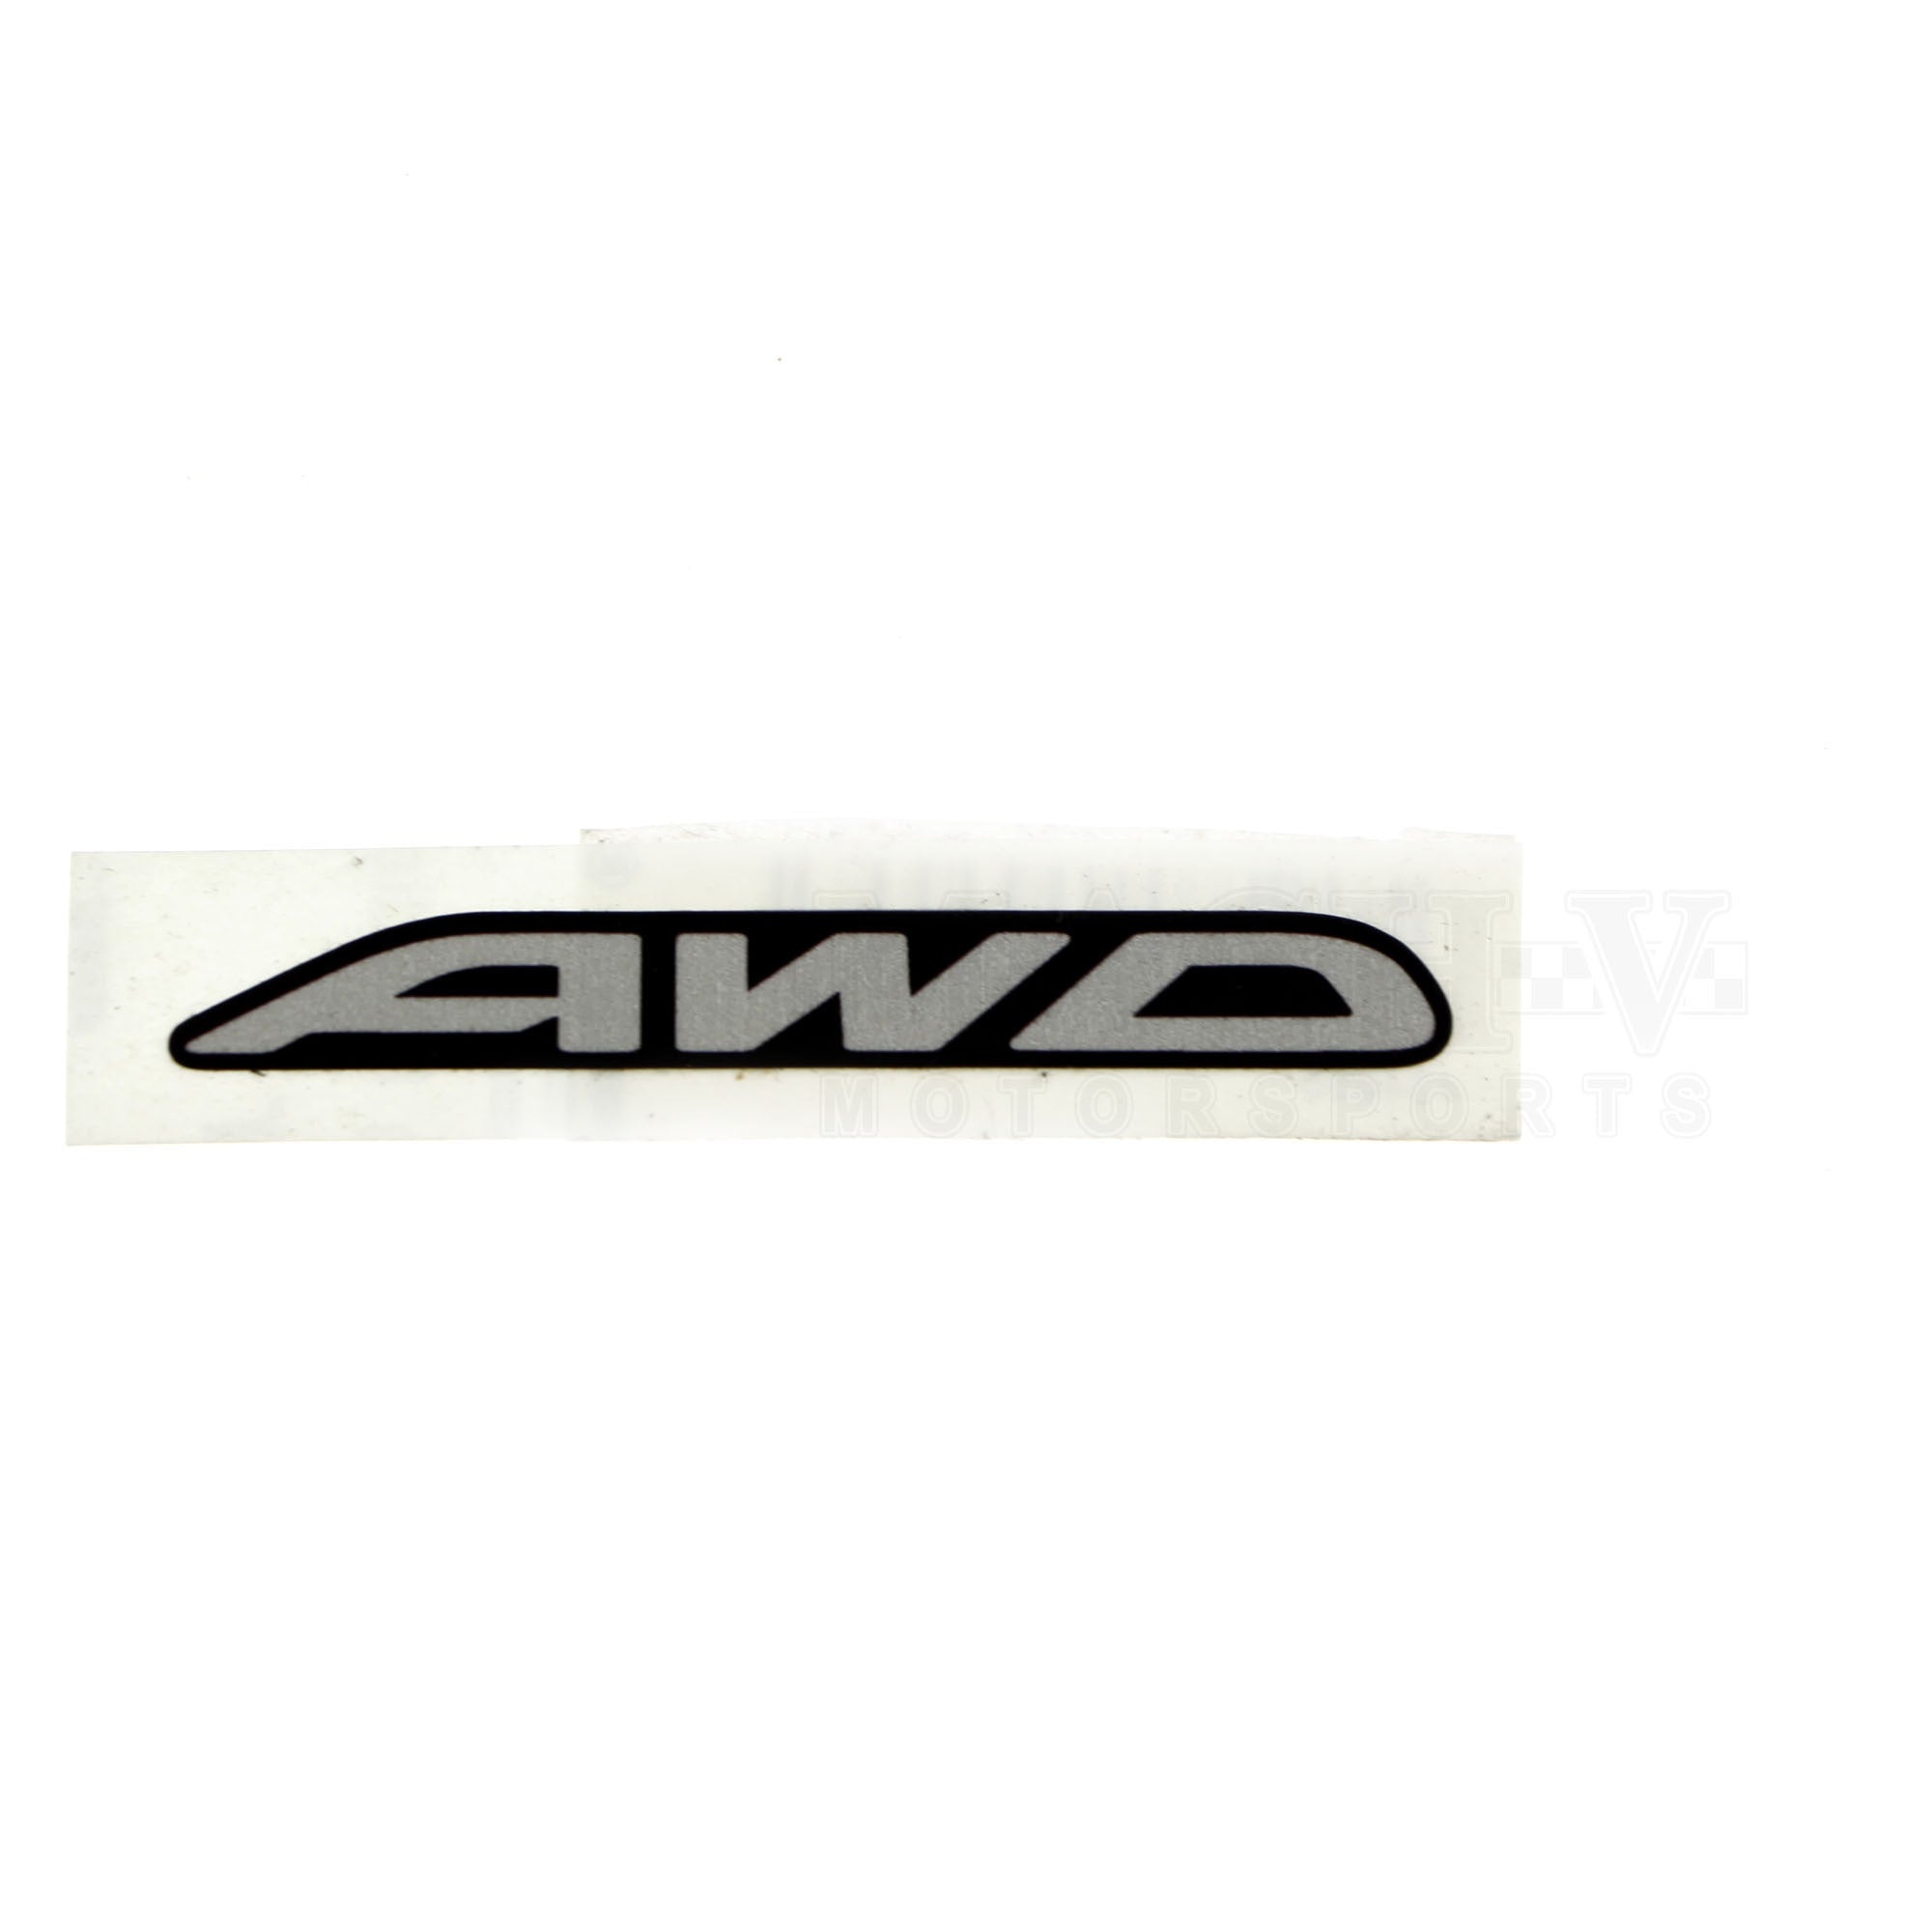 OEM-Style AWD Decals